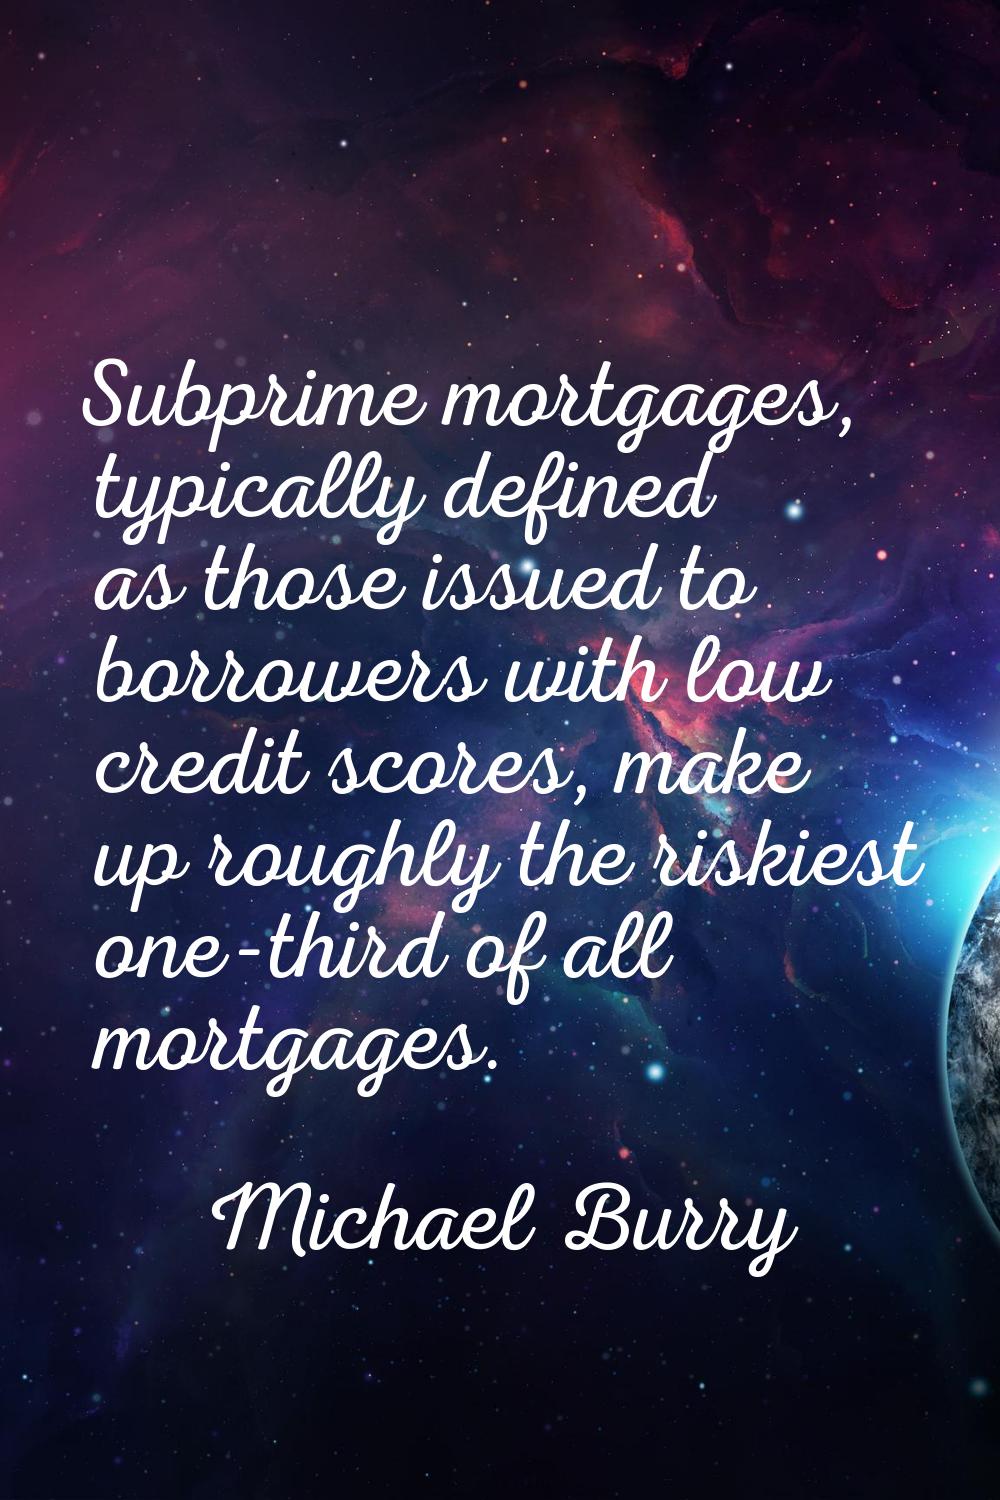 Subprime mortgages, typically defined as those issued to borrowers with low credit scores, make up 